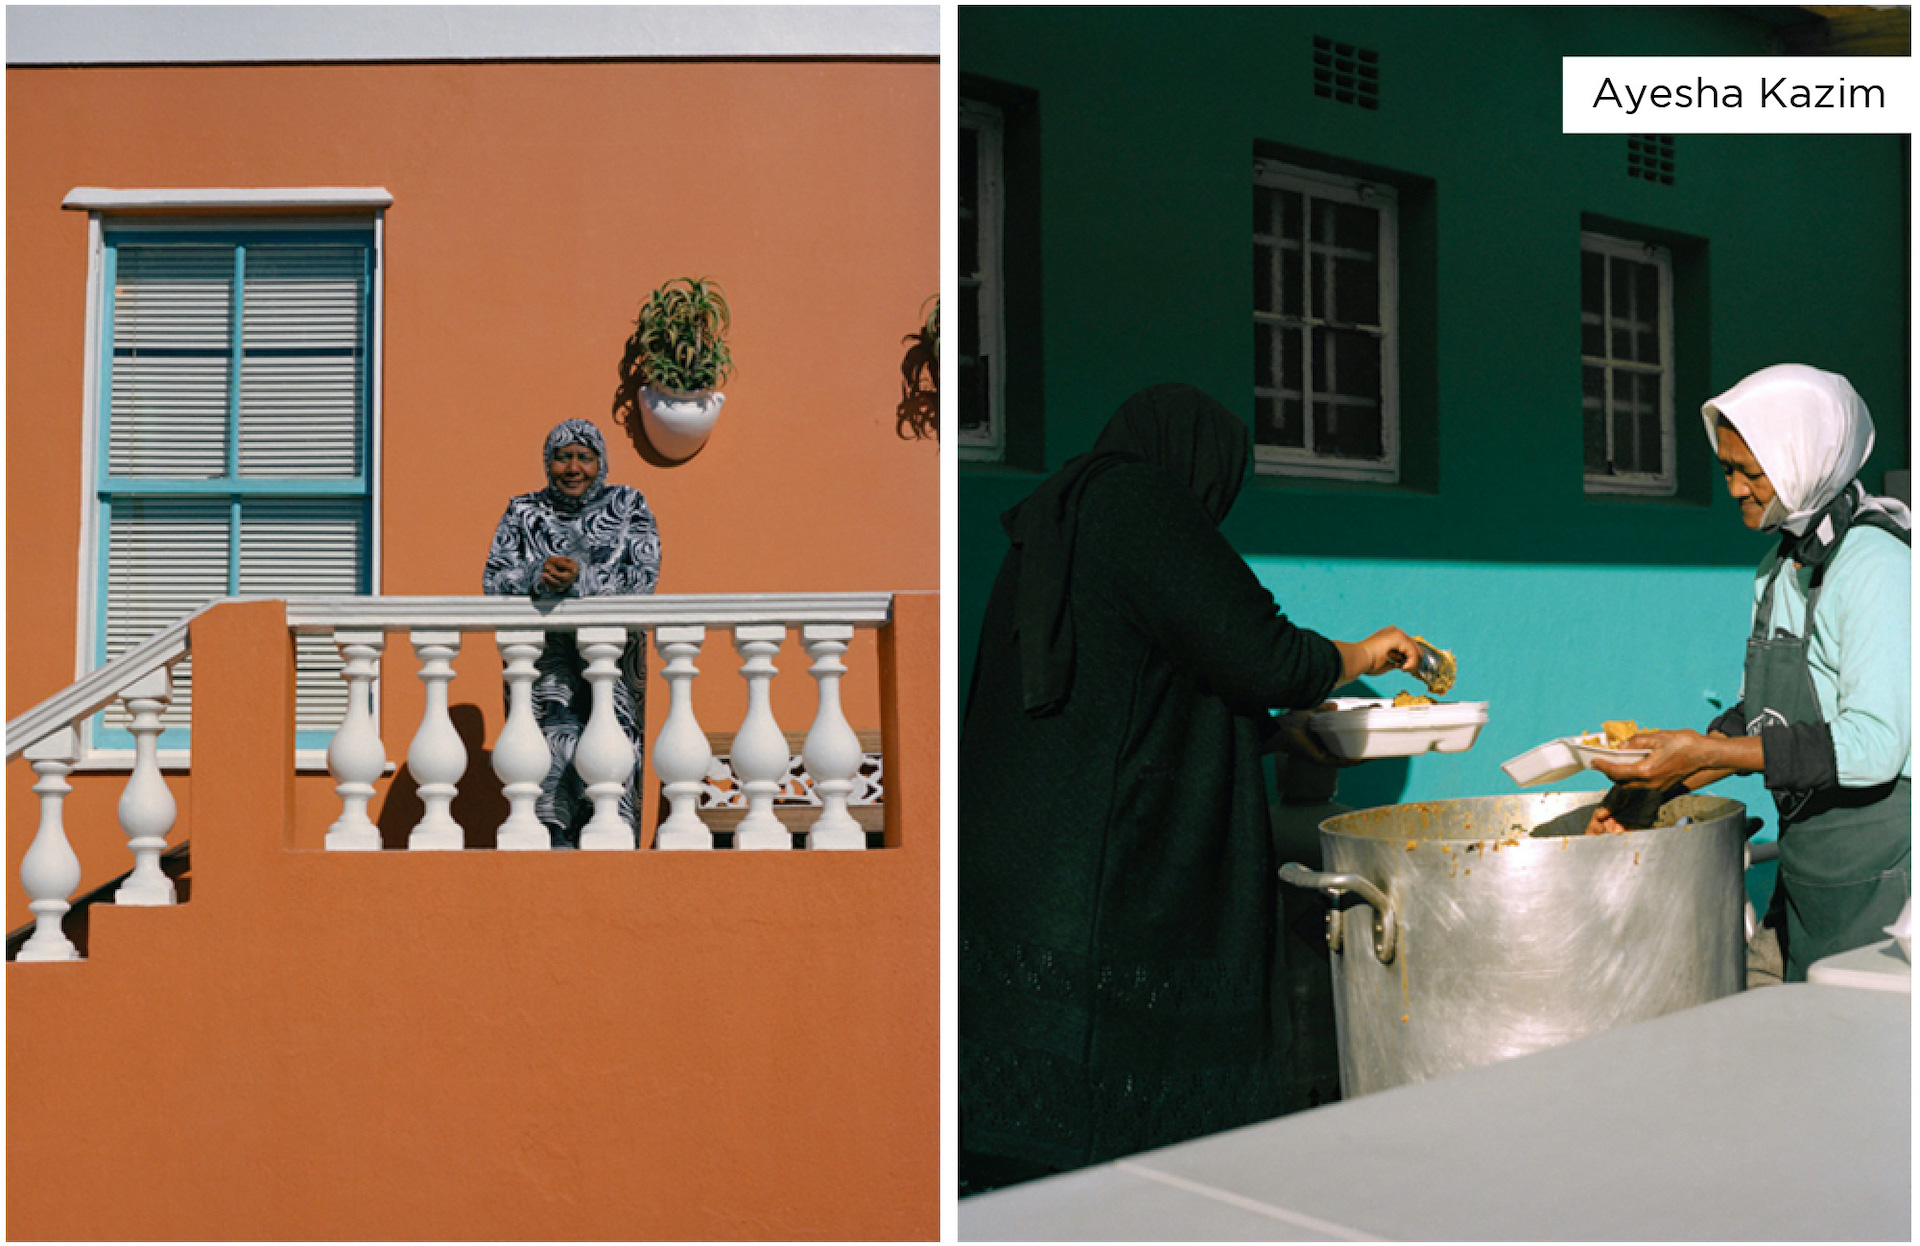 two photos. 1st - A person stands on a balcony in front of a colorful building / 2nd - Two people converse around a meal